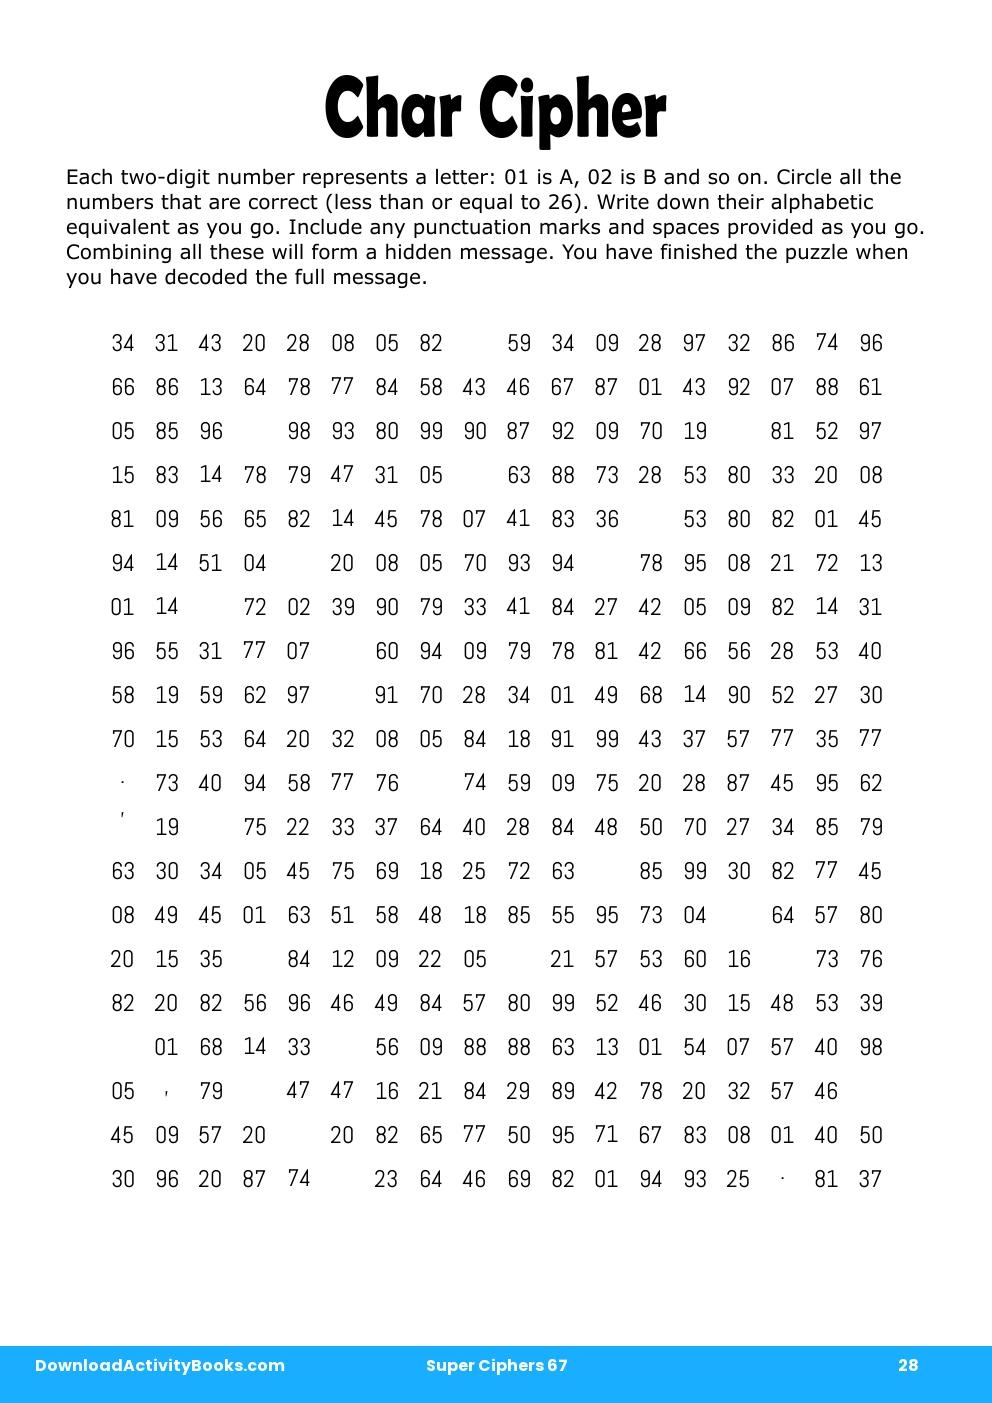 Char Cipher in Super Ciphers 67